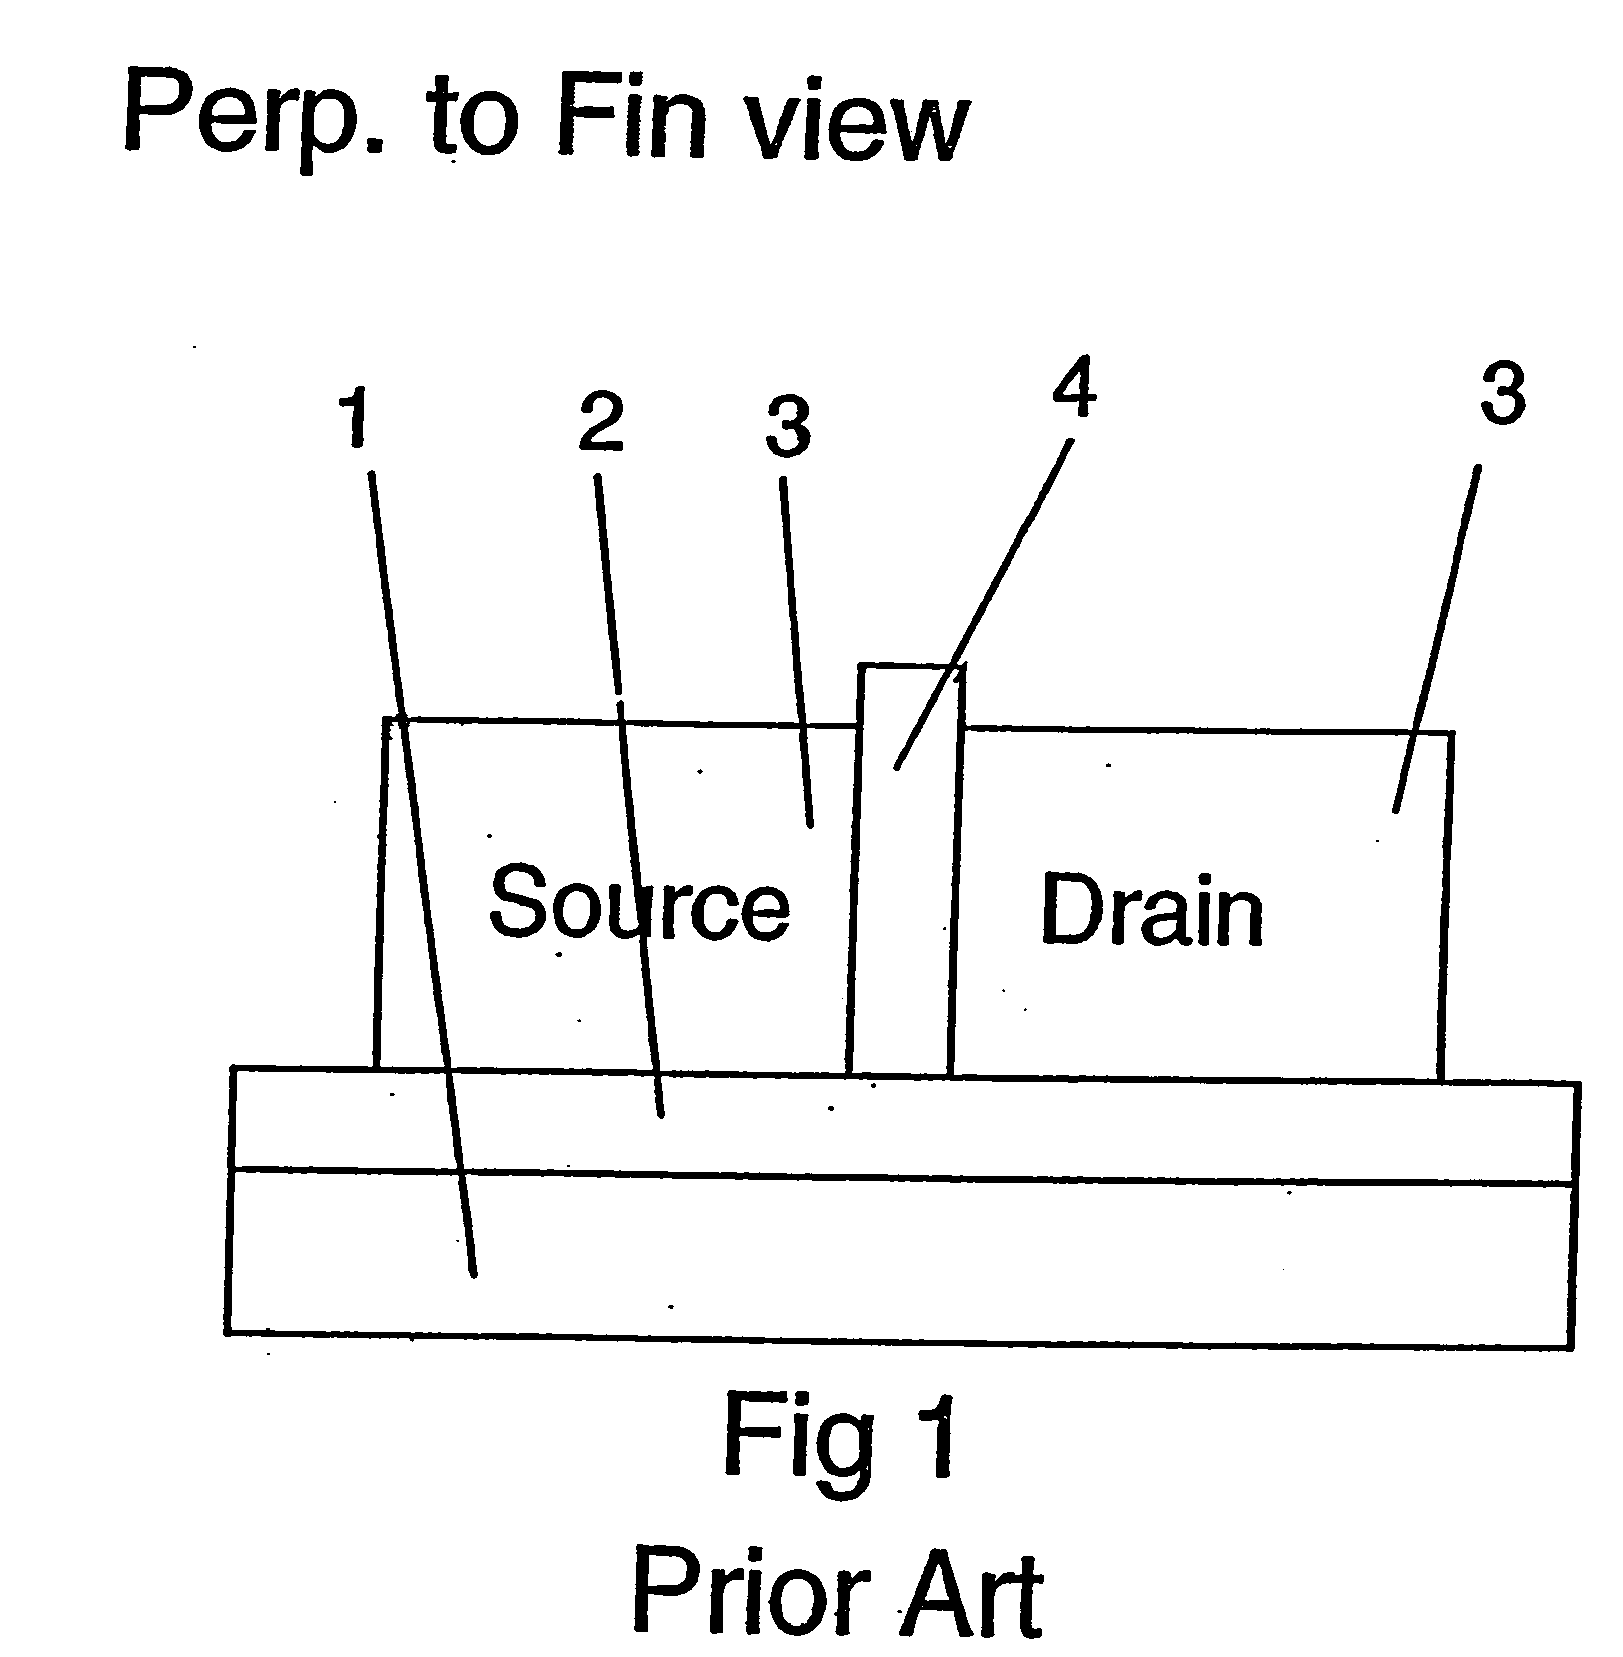 Strained finfet cmos device structures